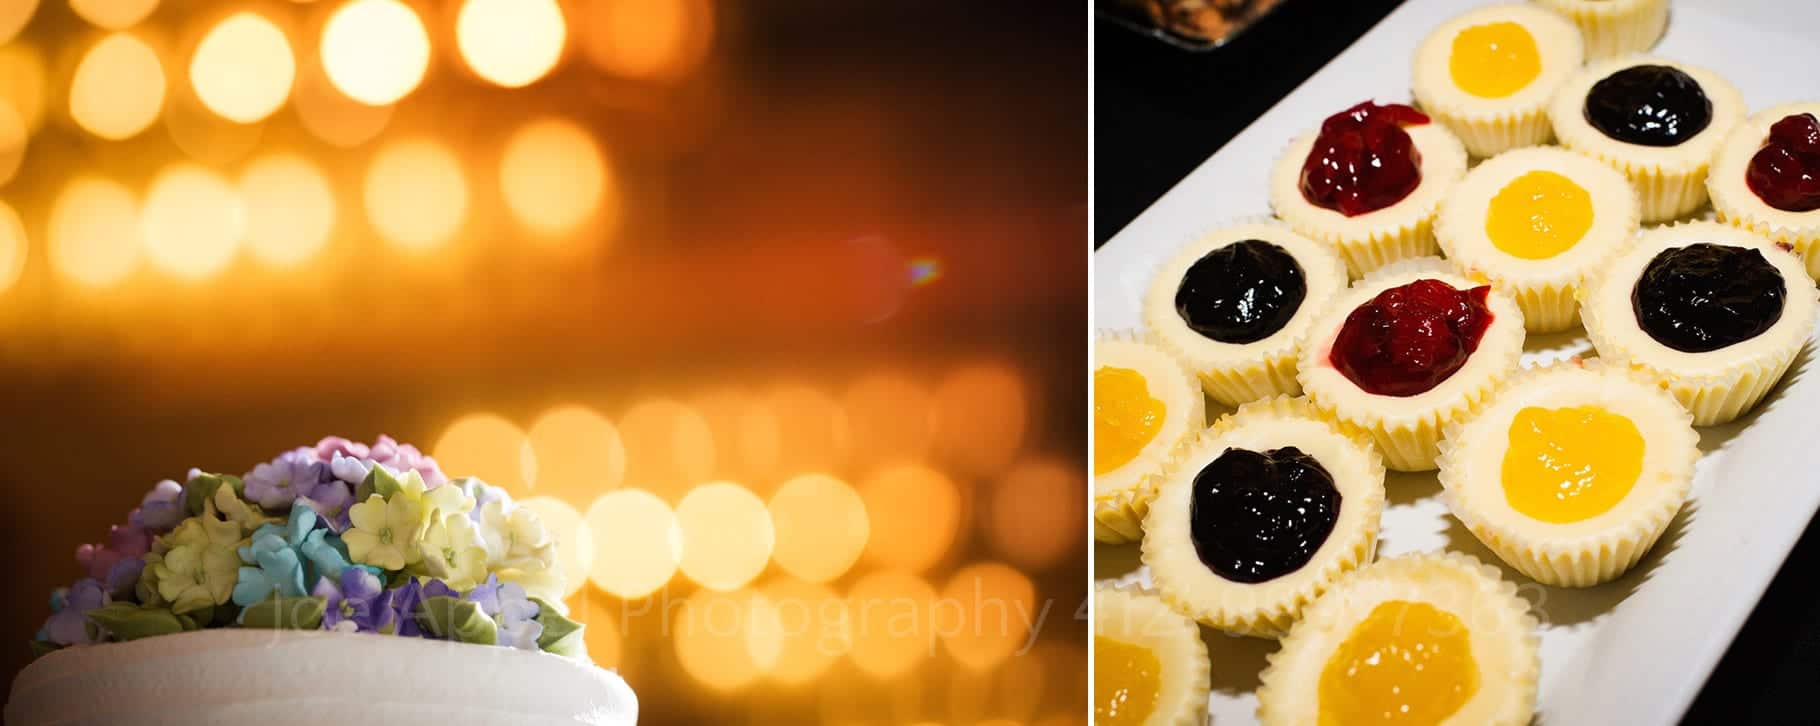 Candy flowers on top of a wedding cake with banks of yellow lights behind it. Italian tarts arrayed on a plate.